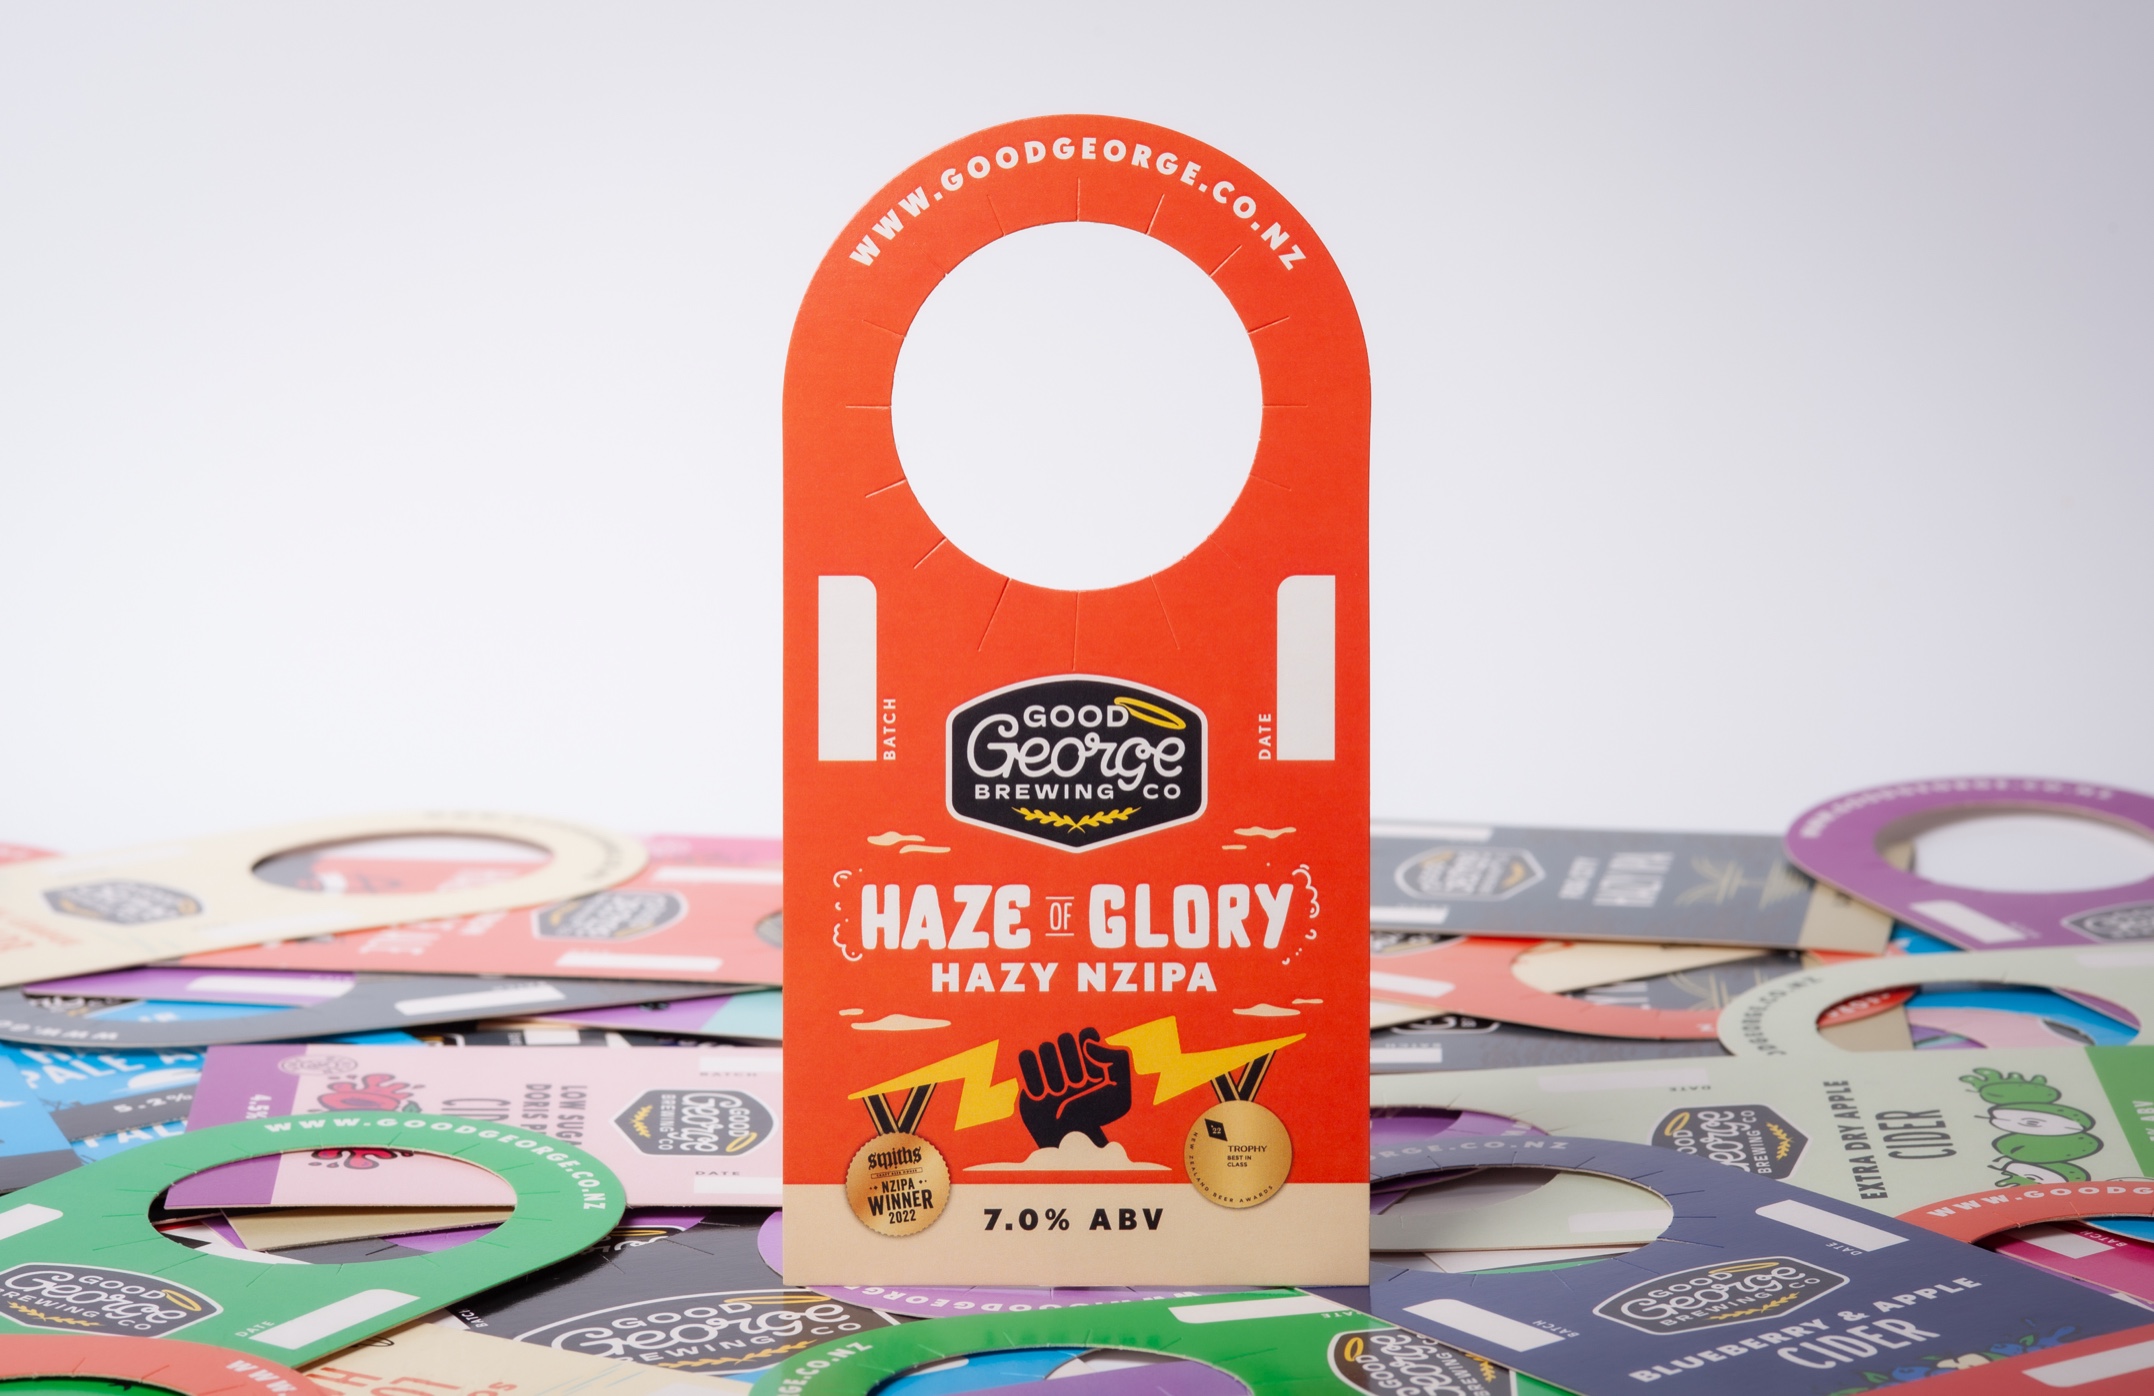 Premium Keg Collar Printing: Reflecting Good George Brewing Co.'s Commitment to Craft